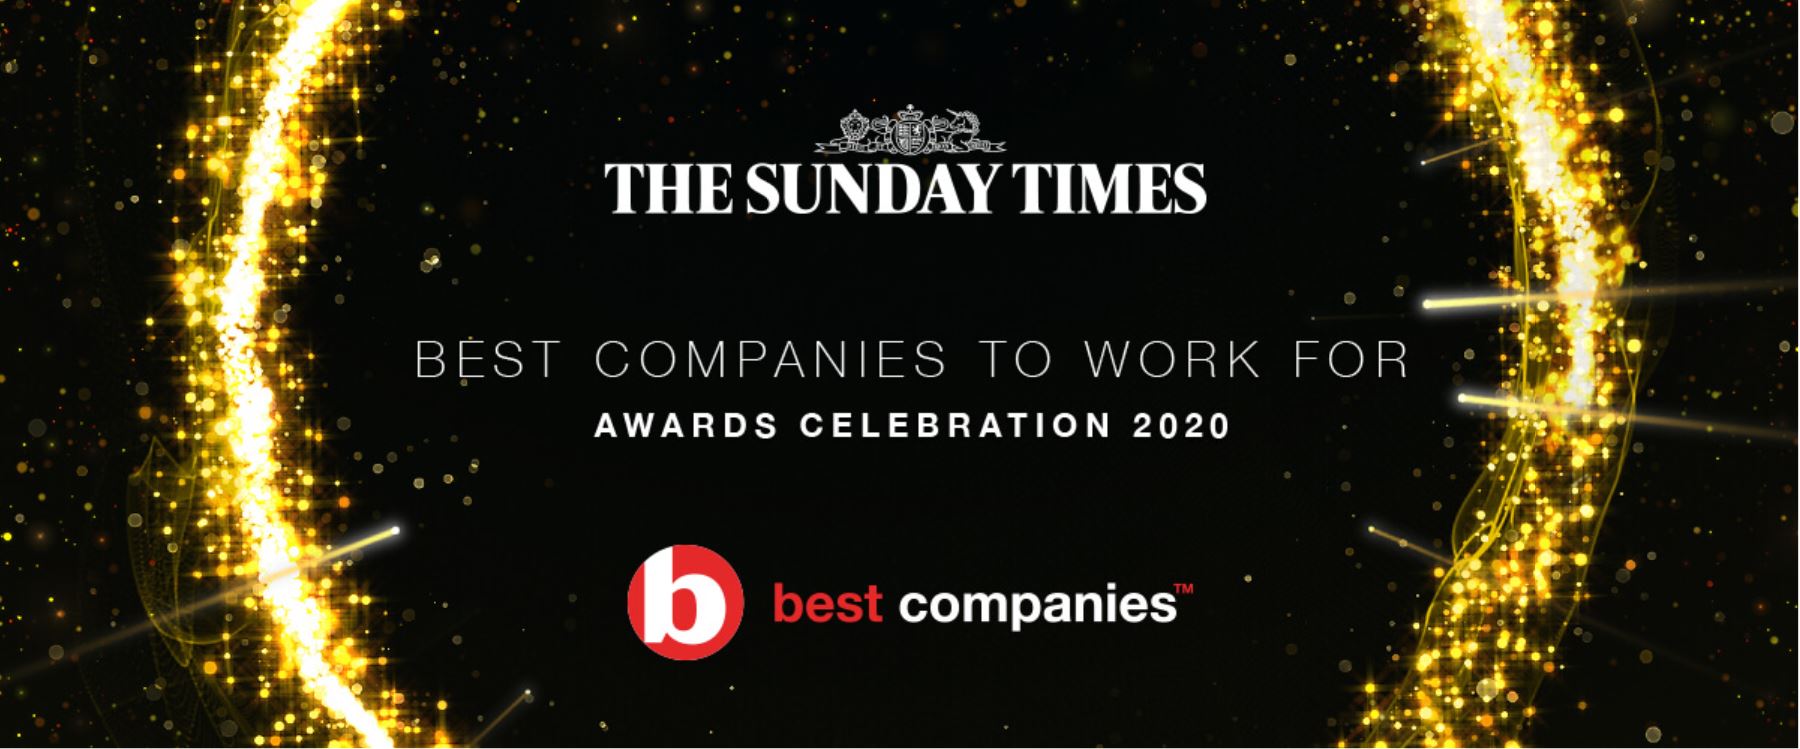 Sunday times best companies healthy performance